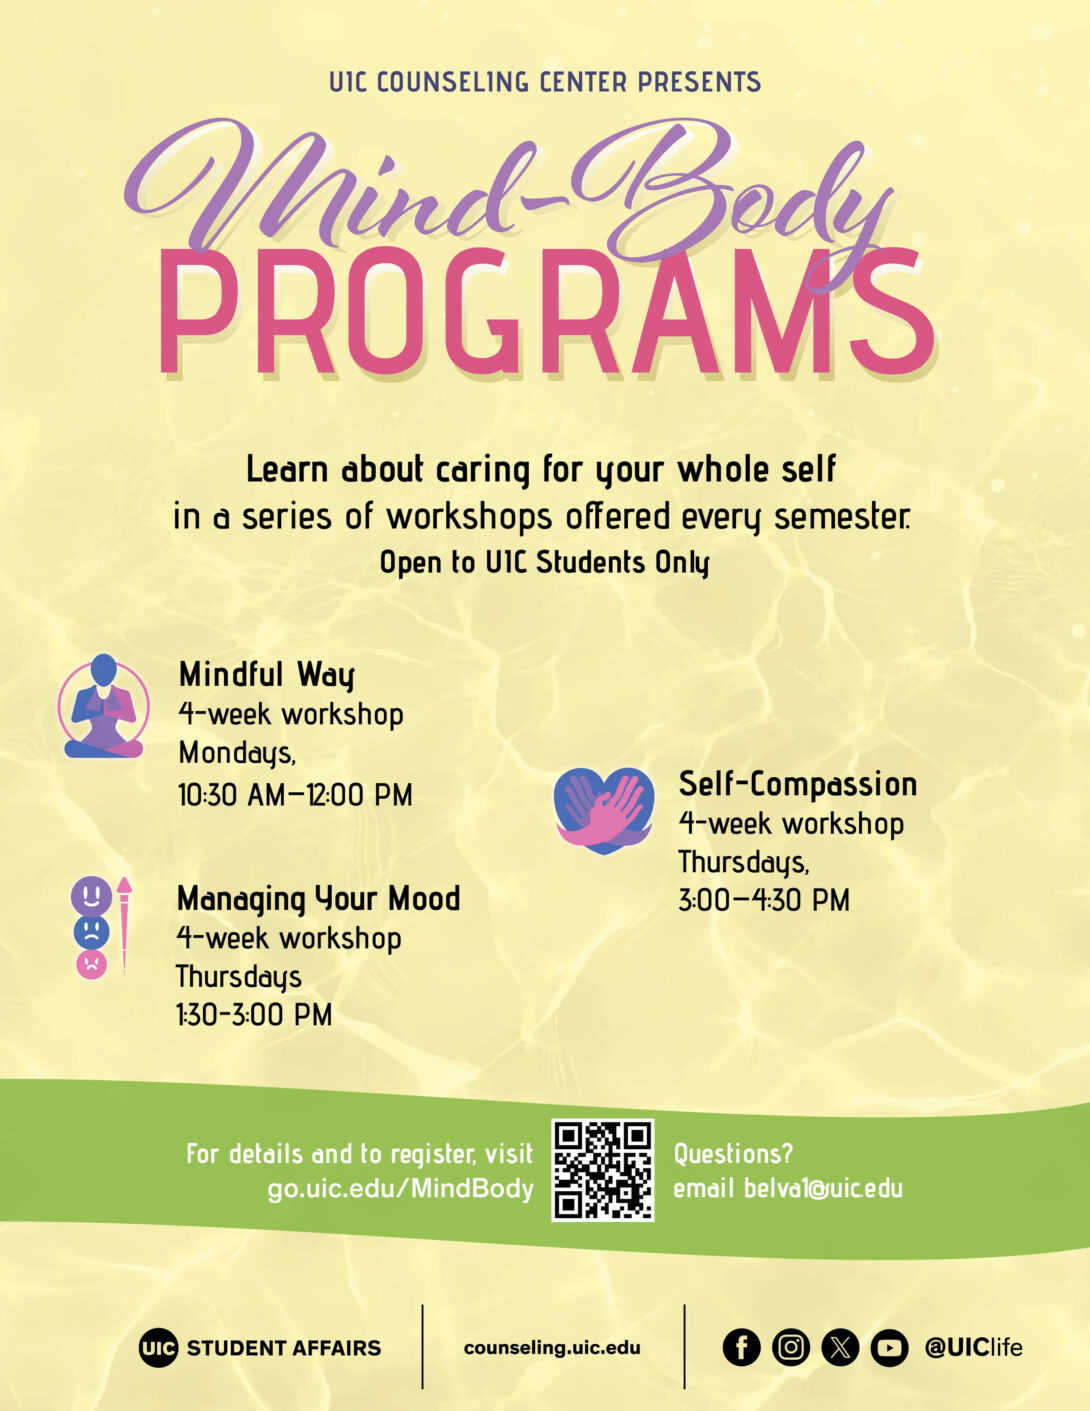 flyer for mind-body programs with a qr code in the bottom center